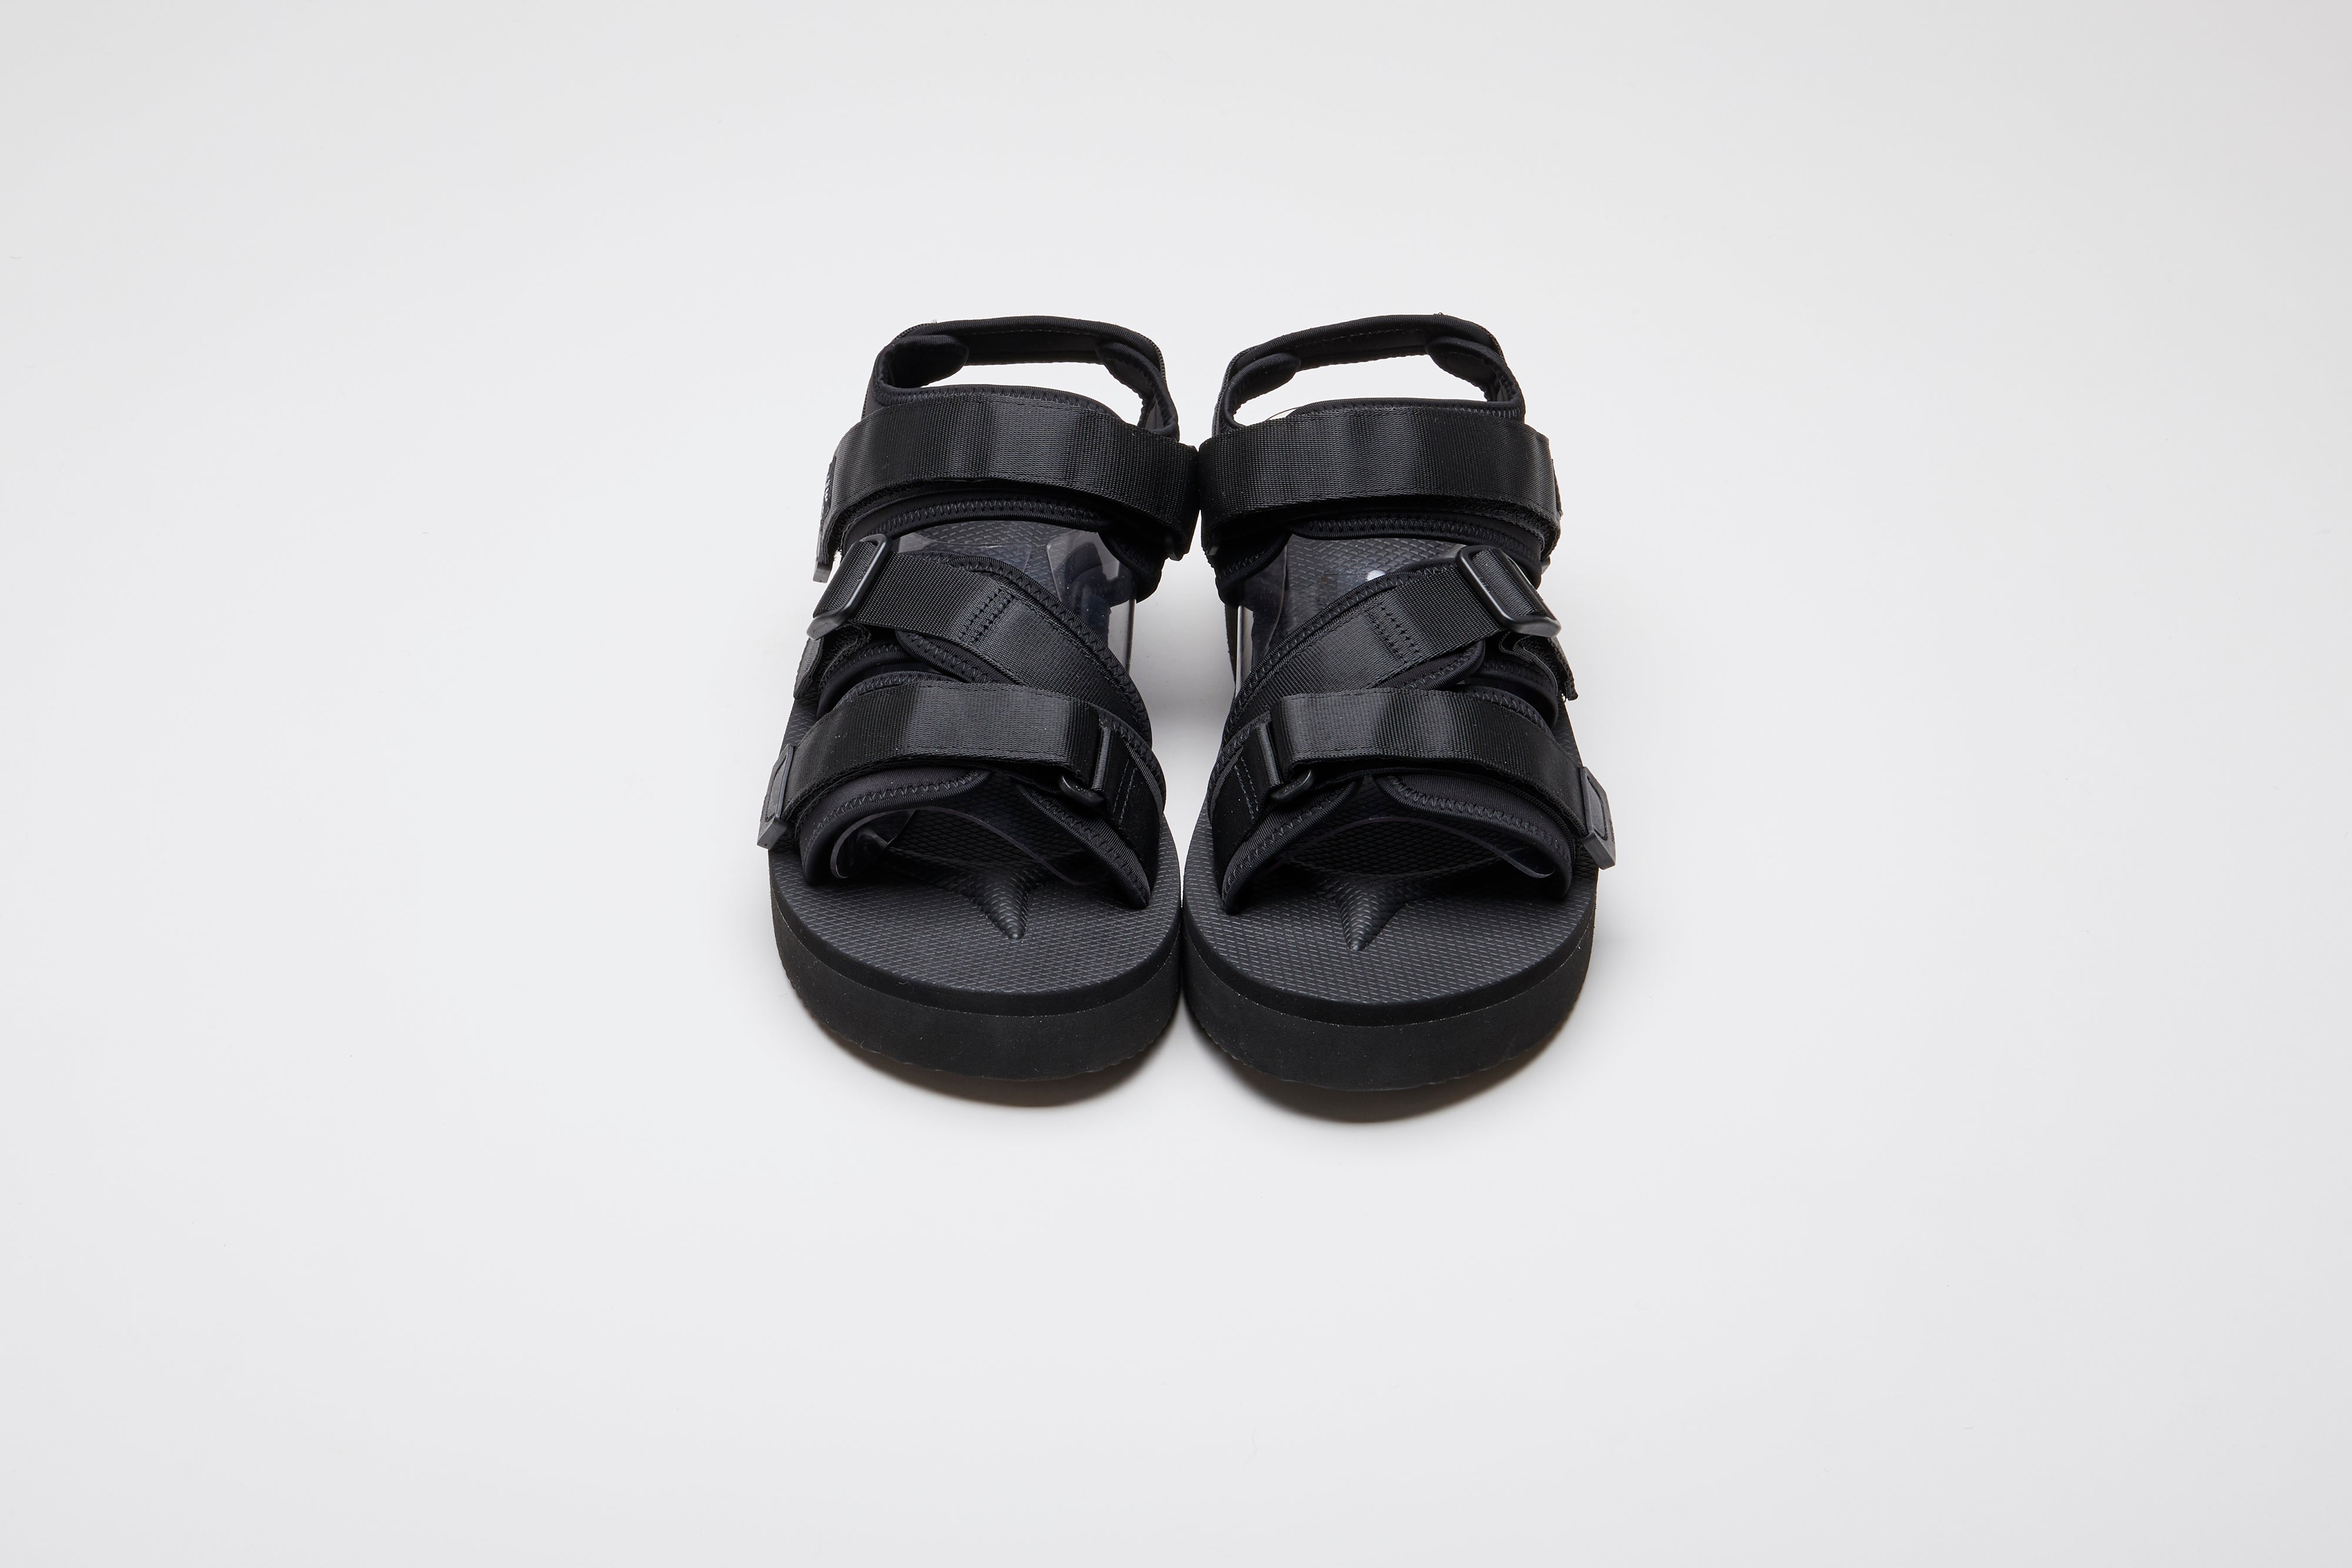 SUICOKE KISEE-PO sandals with black nylon upper, black midsole and sole, strap and logo patch. From Spring/Summer 2023 collection on eightywingold Web Store, an official partner of SUICOKE. OG-044PO BLACK